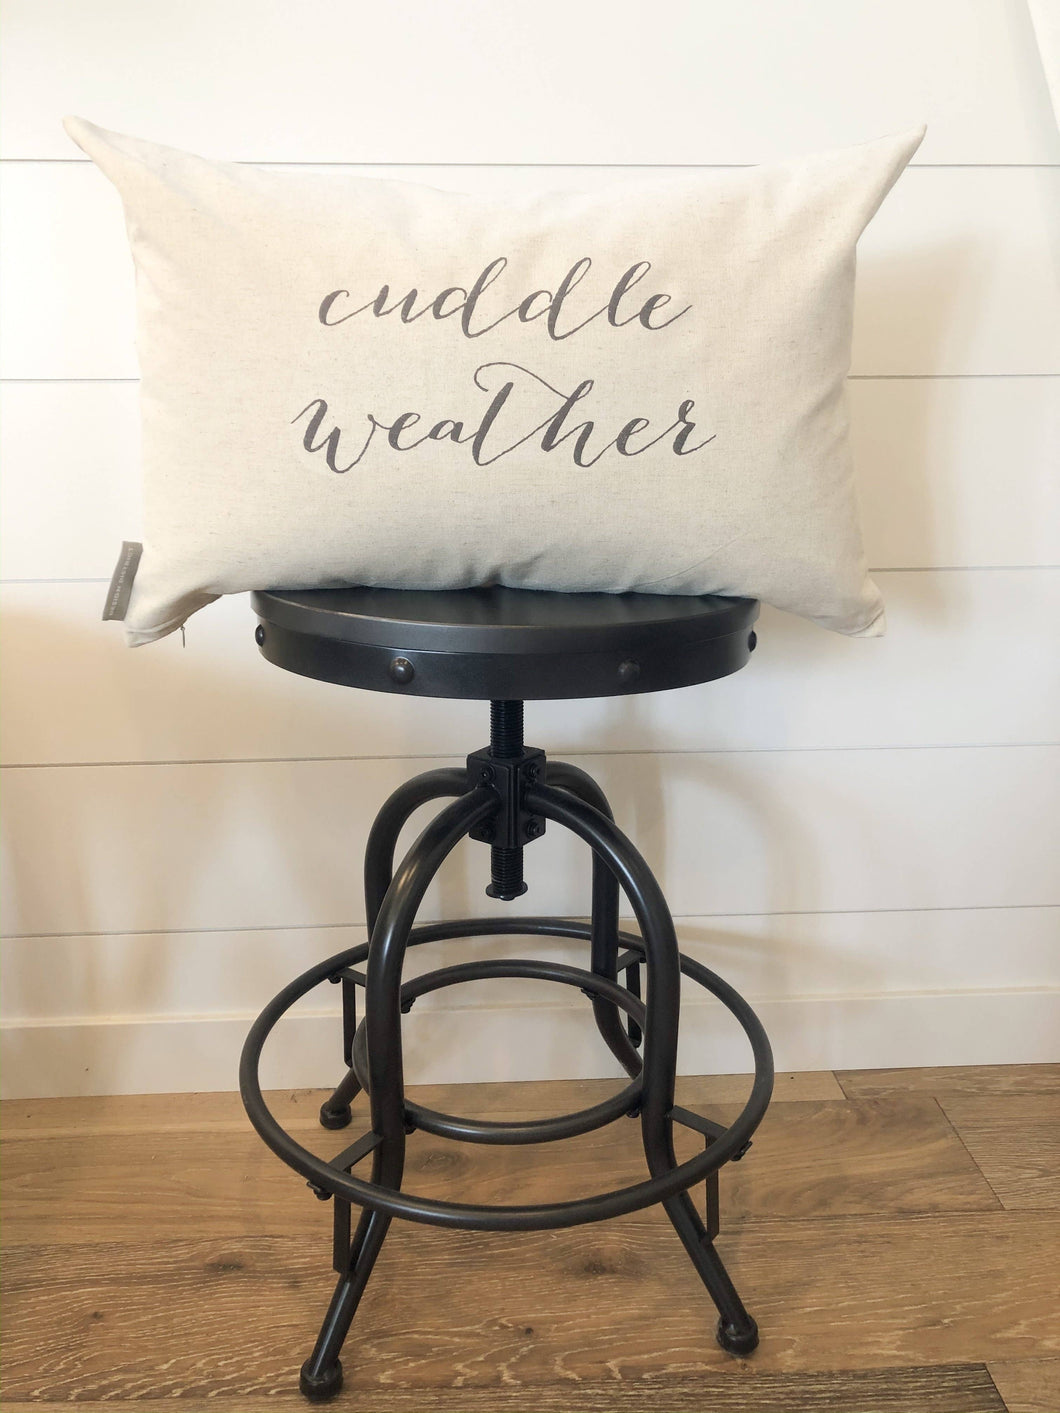 Cuddle Weather Pillow